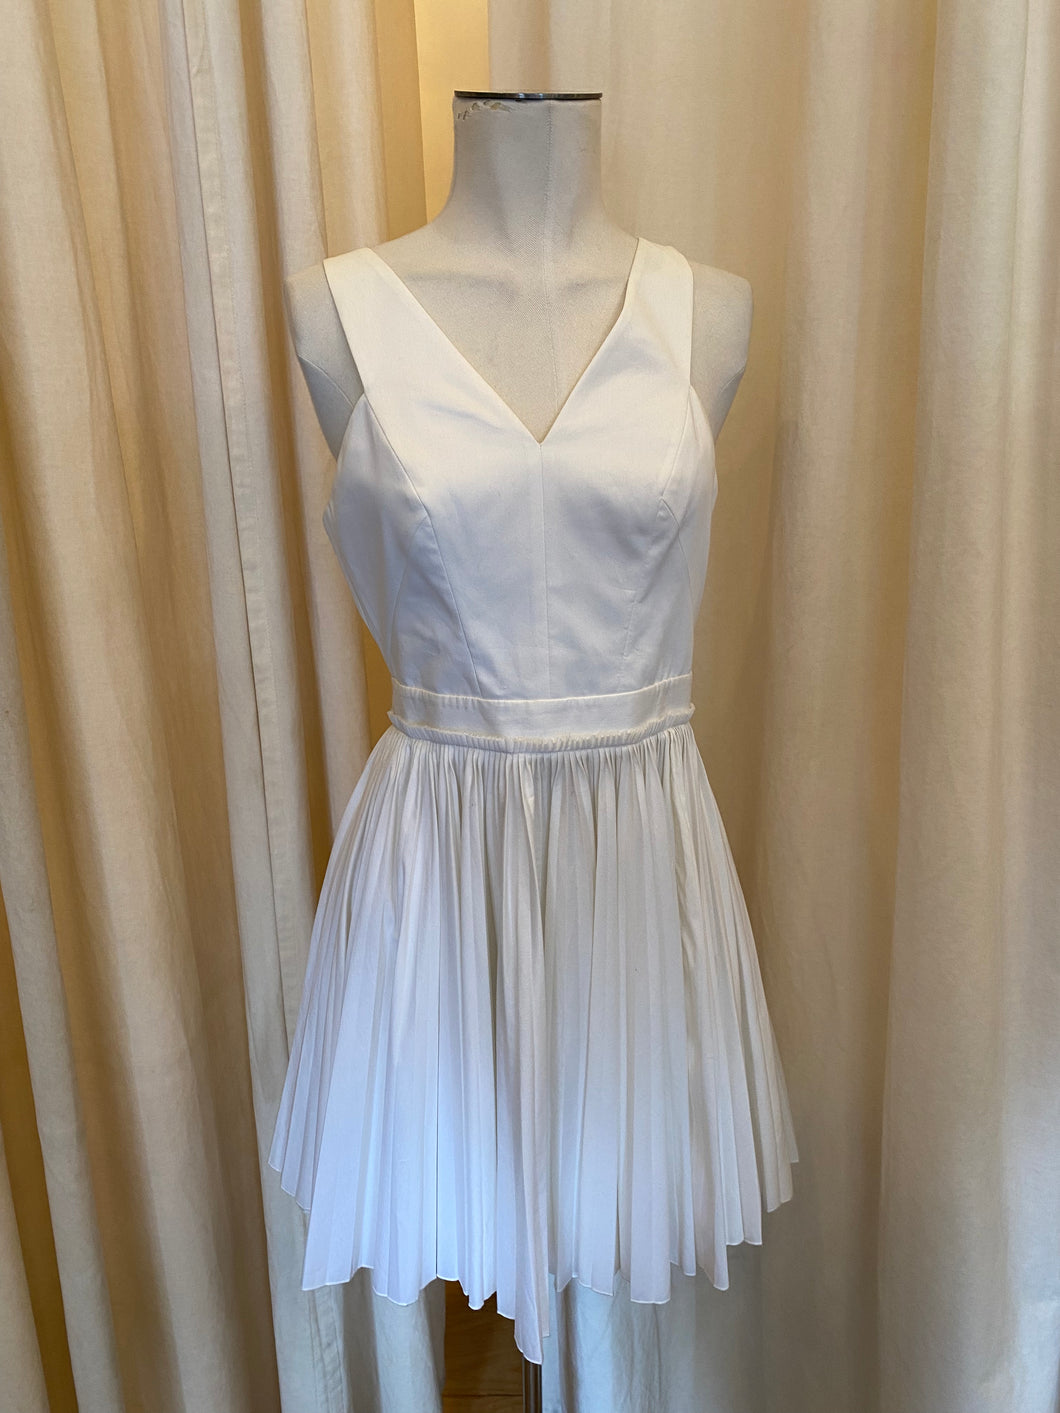 New with Tag Robert Rodriguez White Pleated Dress